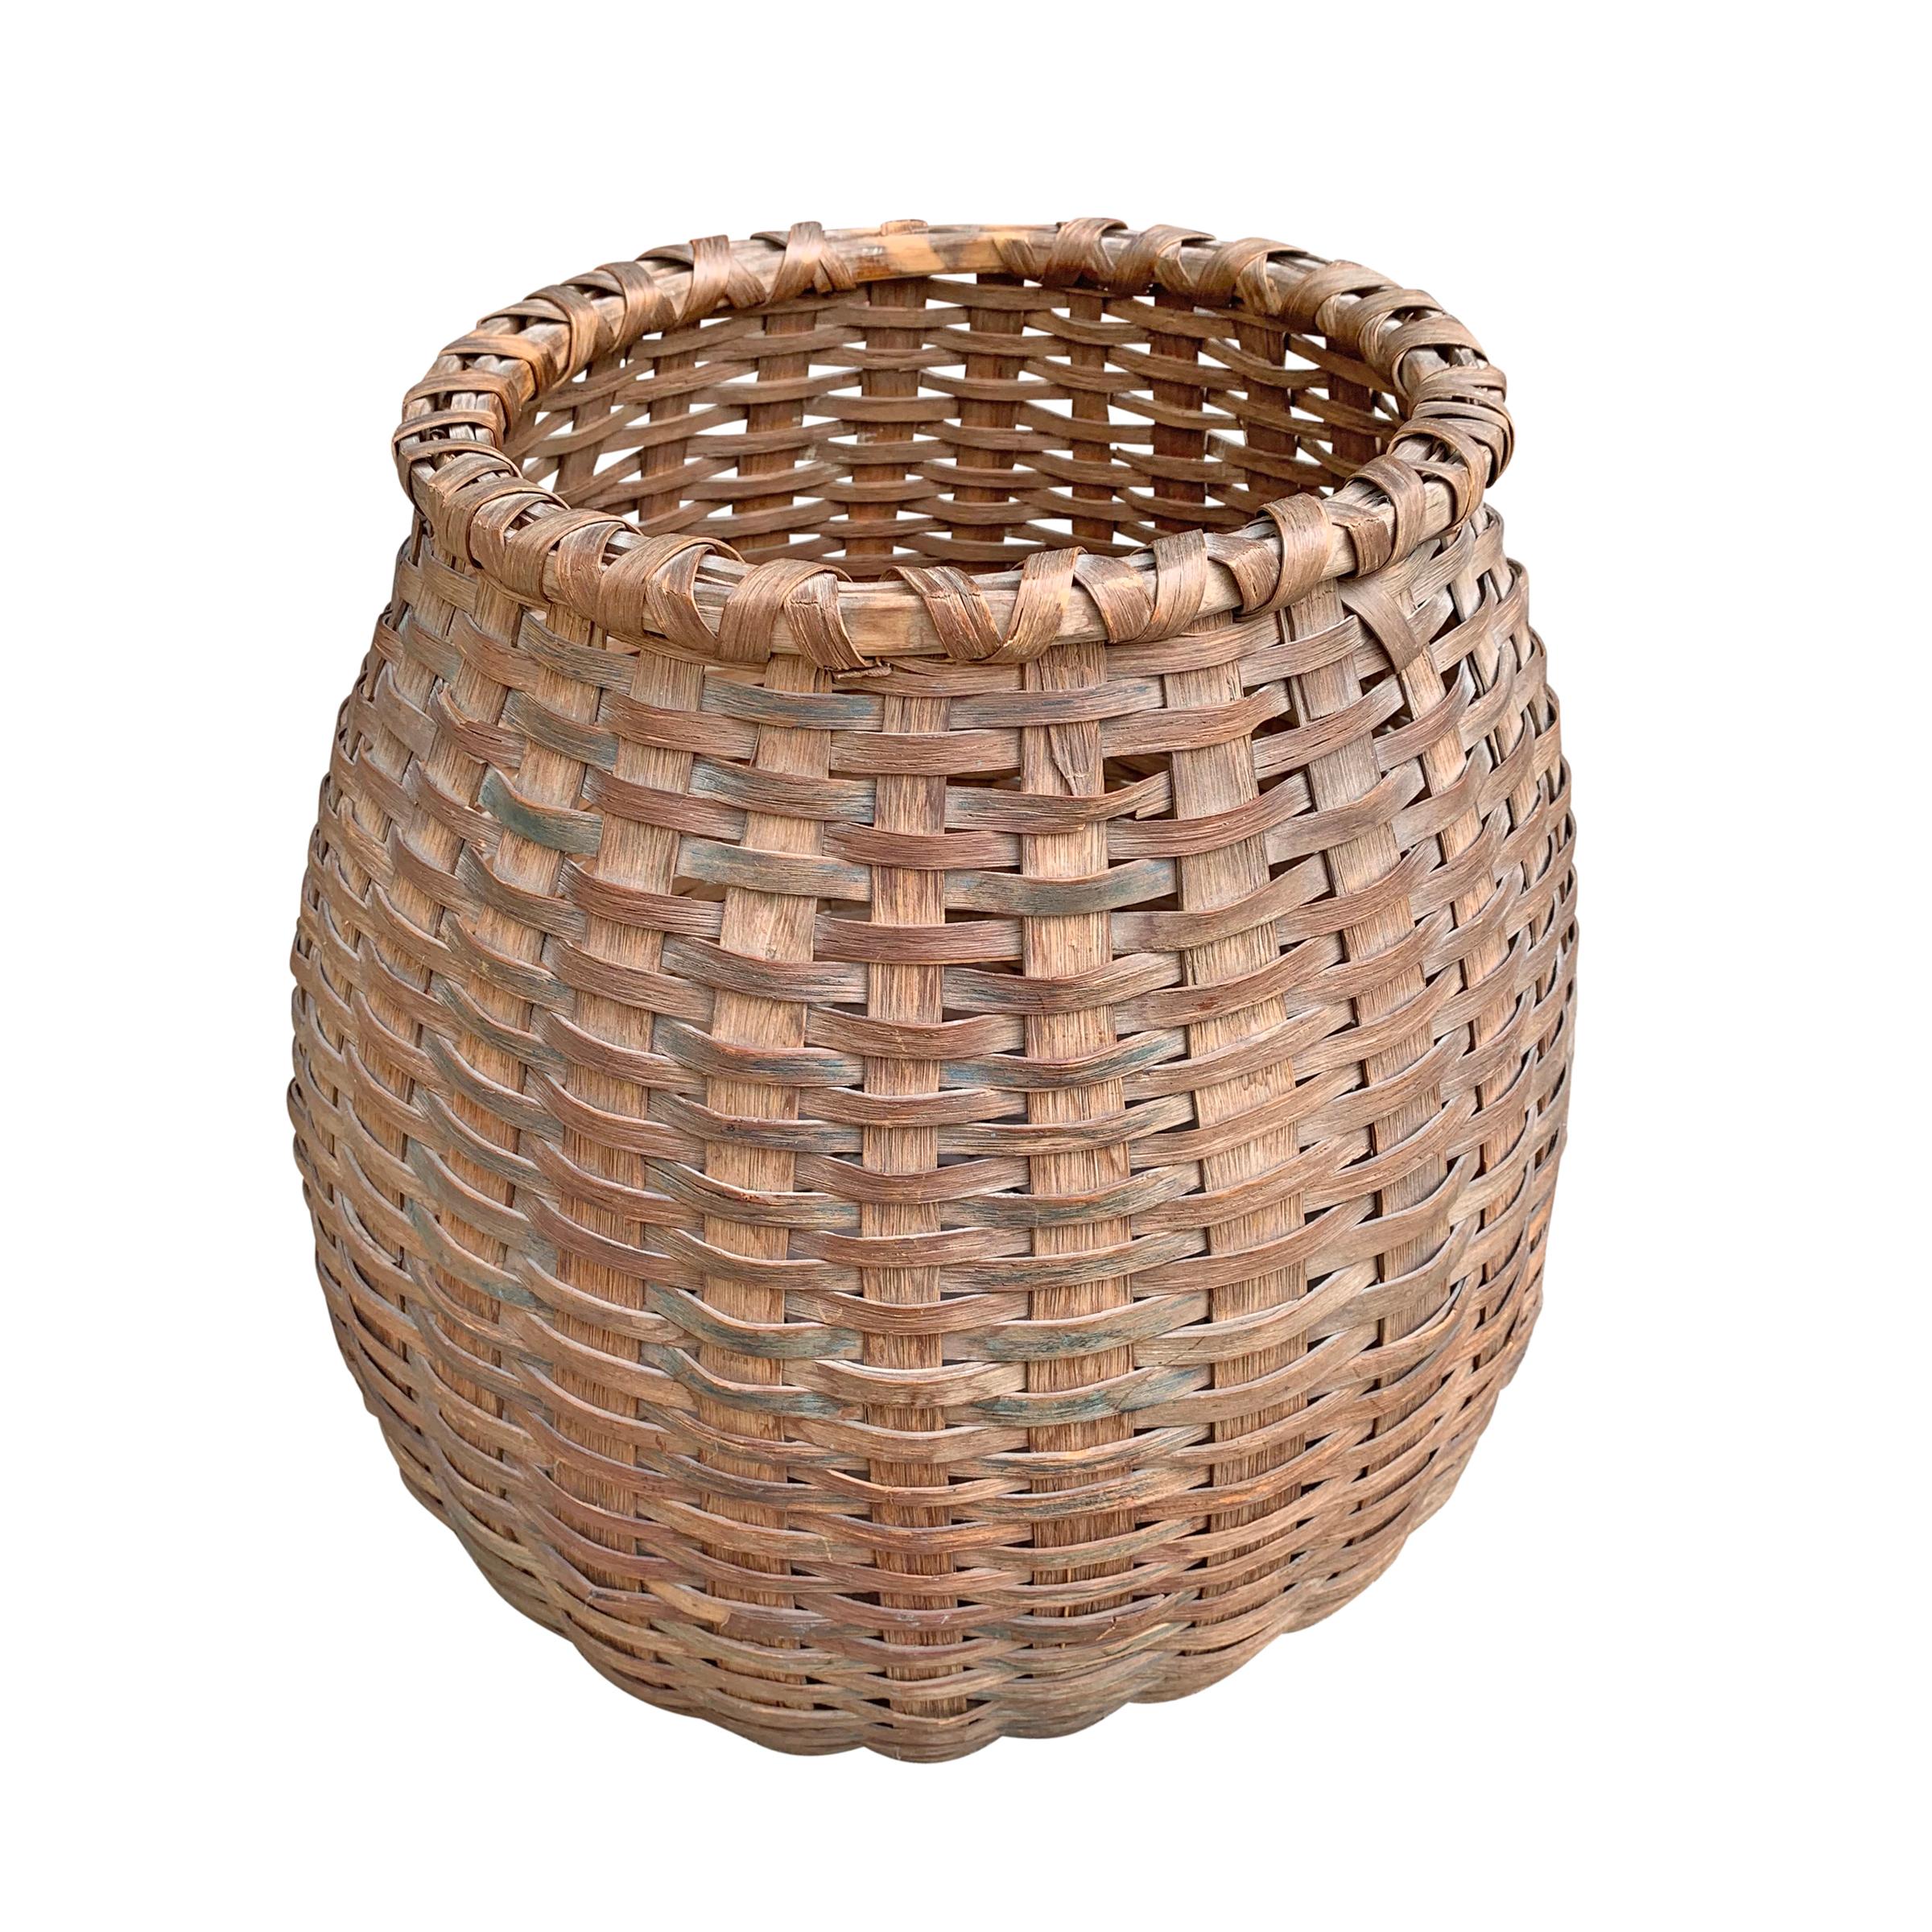 A beautiful 19th century American oak splint basket of ovoid form with a double-banded rim, traces of original green paint, and a twisted splint base. A chic waste paper basket!